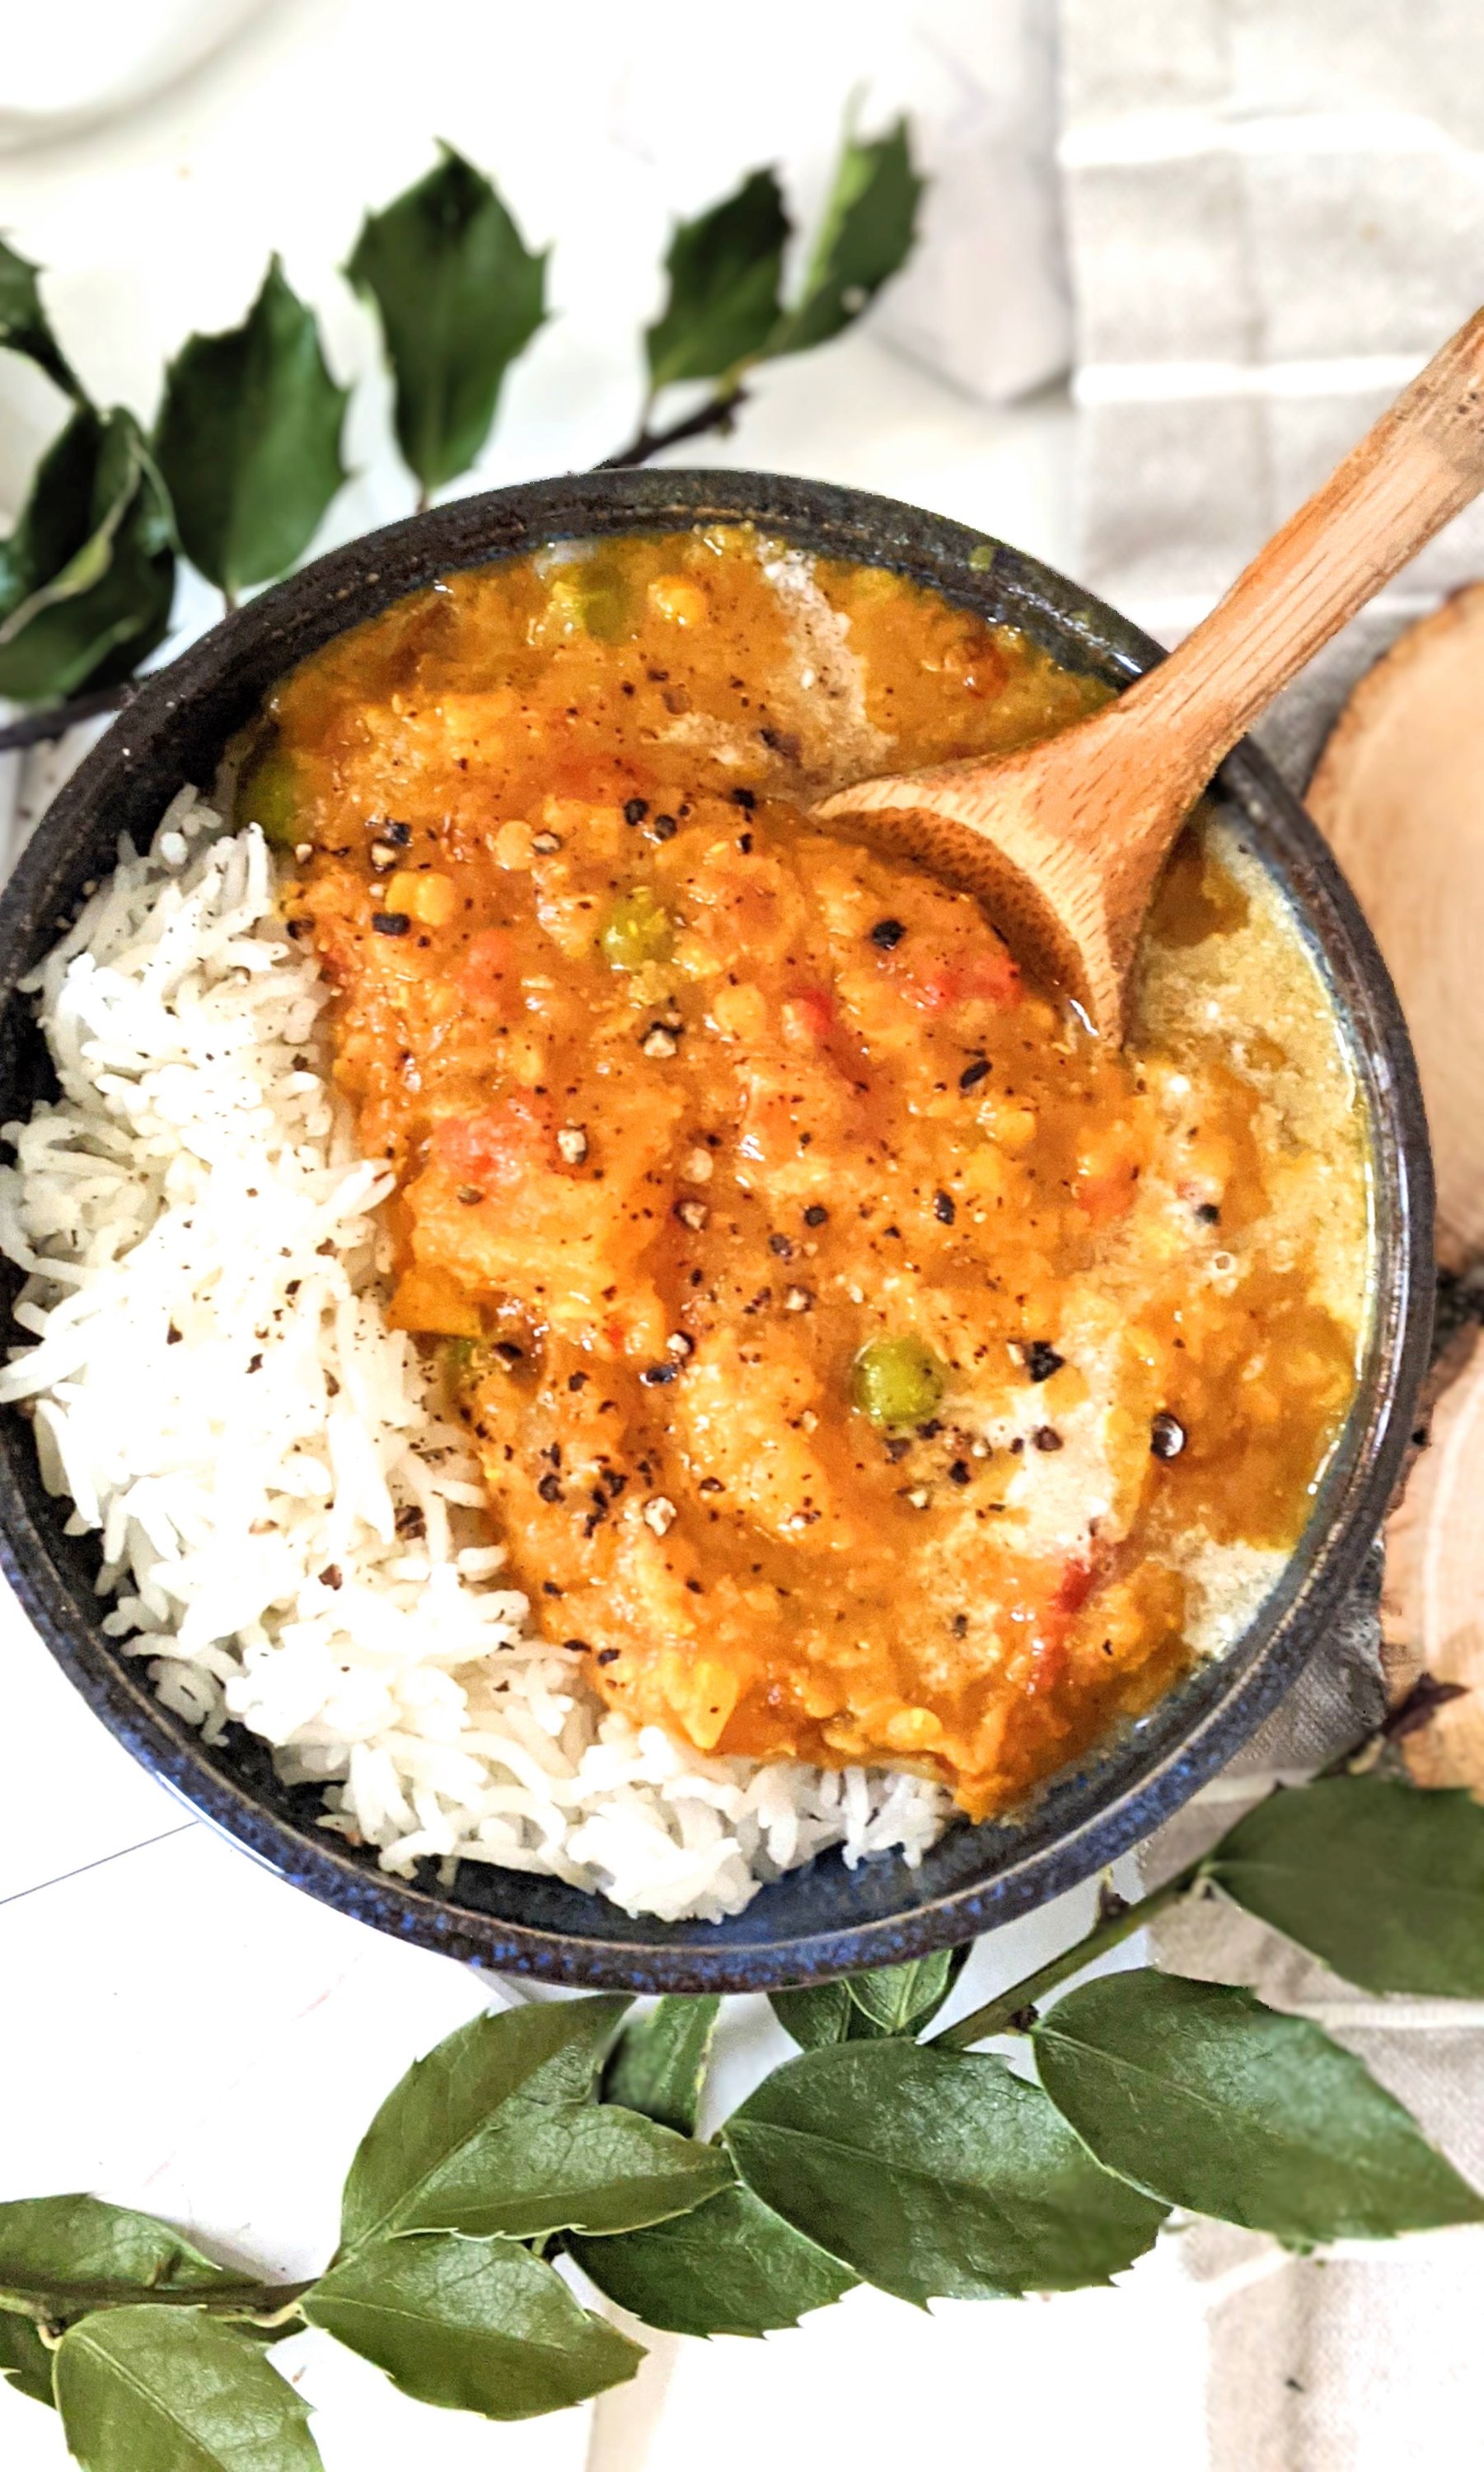 butternut squash red lentil dahl recipe vegan gluten free dairy free dal recipe red lentil and squash indian recipes healthy plant based high protein indian food